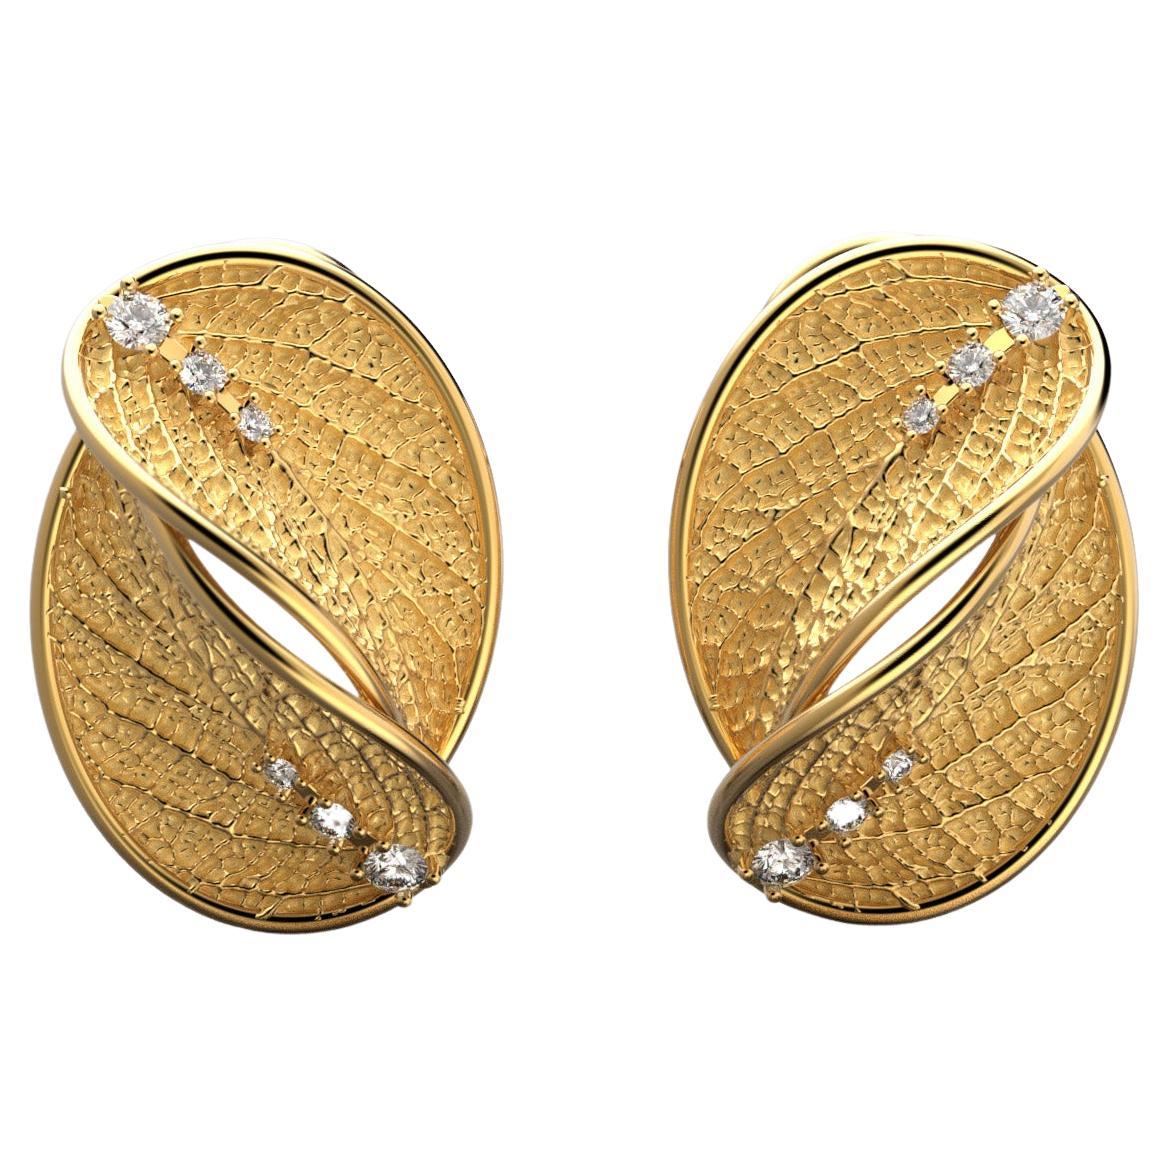 Made to order Diamond stud earrings in 18k Gold with leaf design. Flora collection.
The earrings of the Flora collection have the shape of the ash leaf, a sacred tree in many cultures, a symbol of the sun and always used as a protection.
The